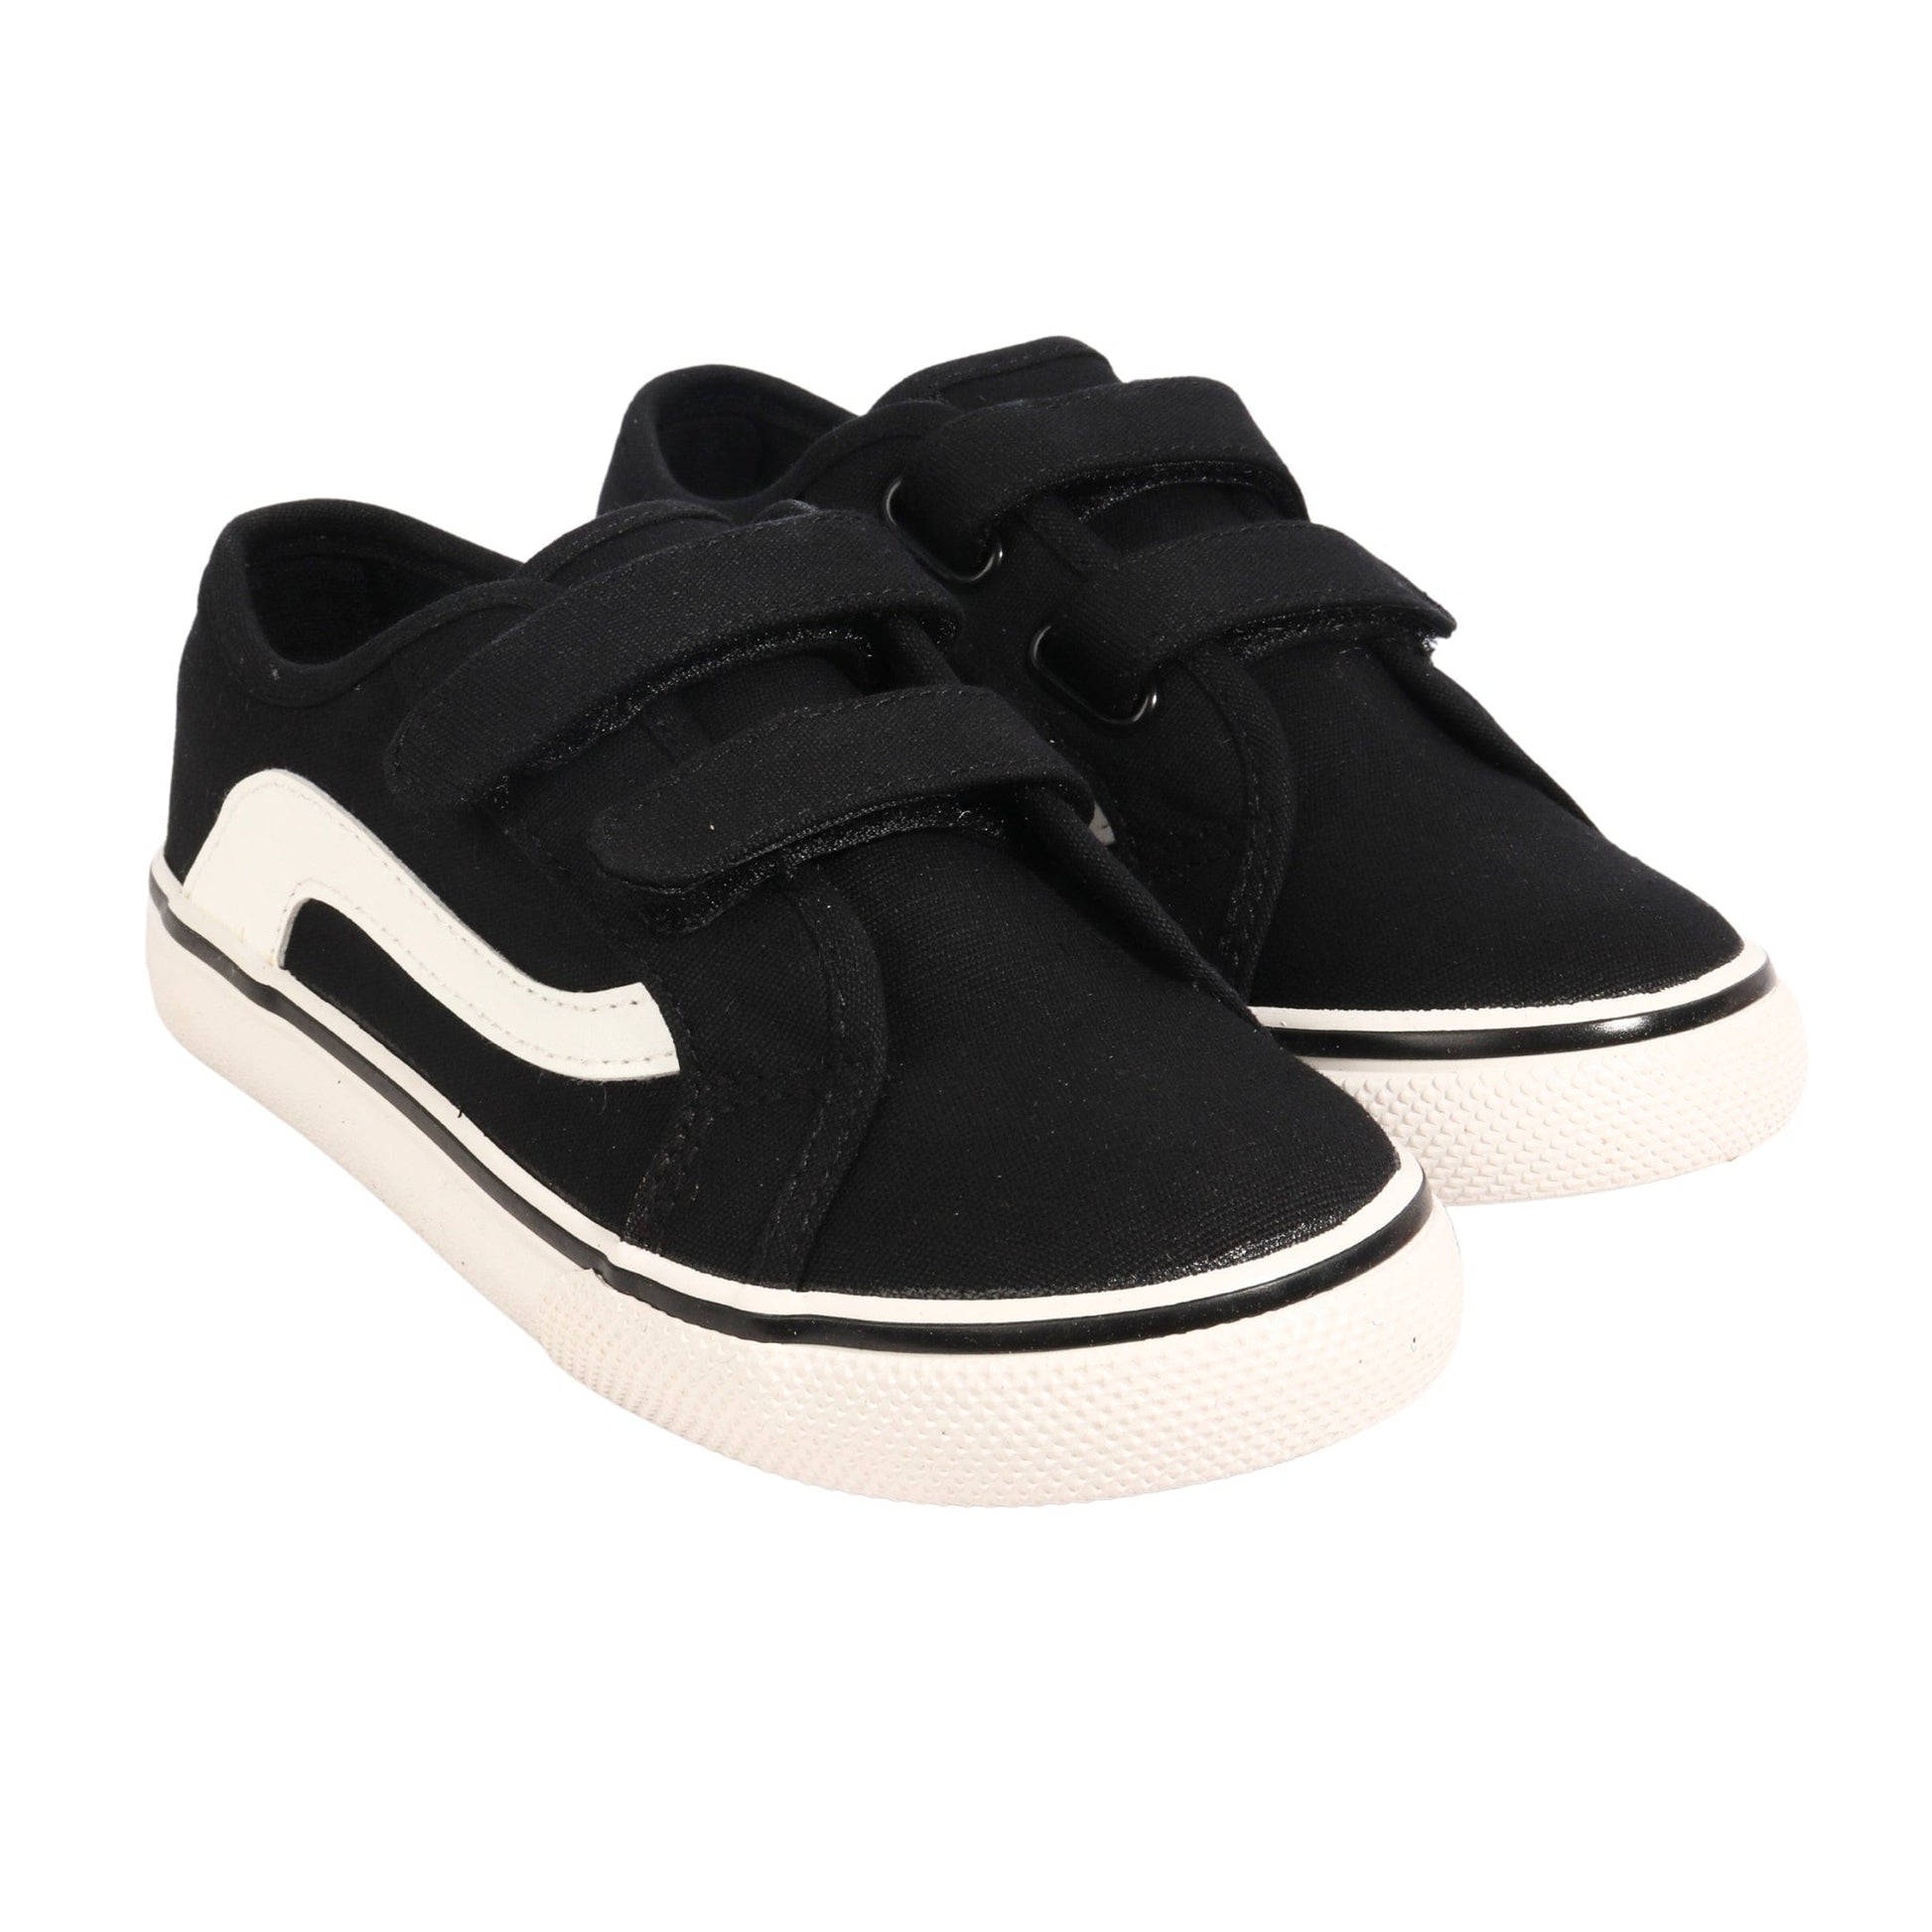 WONDER NATION Baby Shoes 23.5 / Black WONDER NATION - Baby - Casual Canvas Sneaker